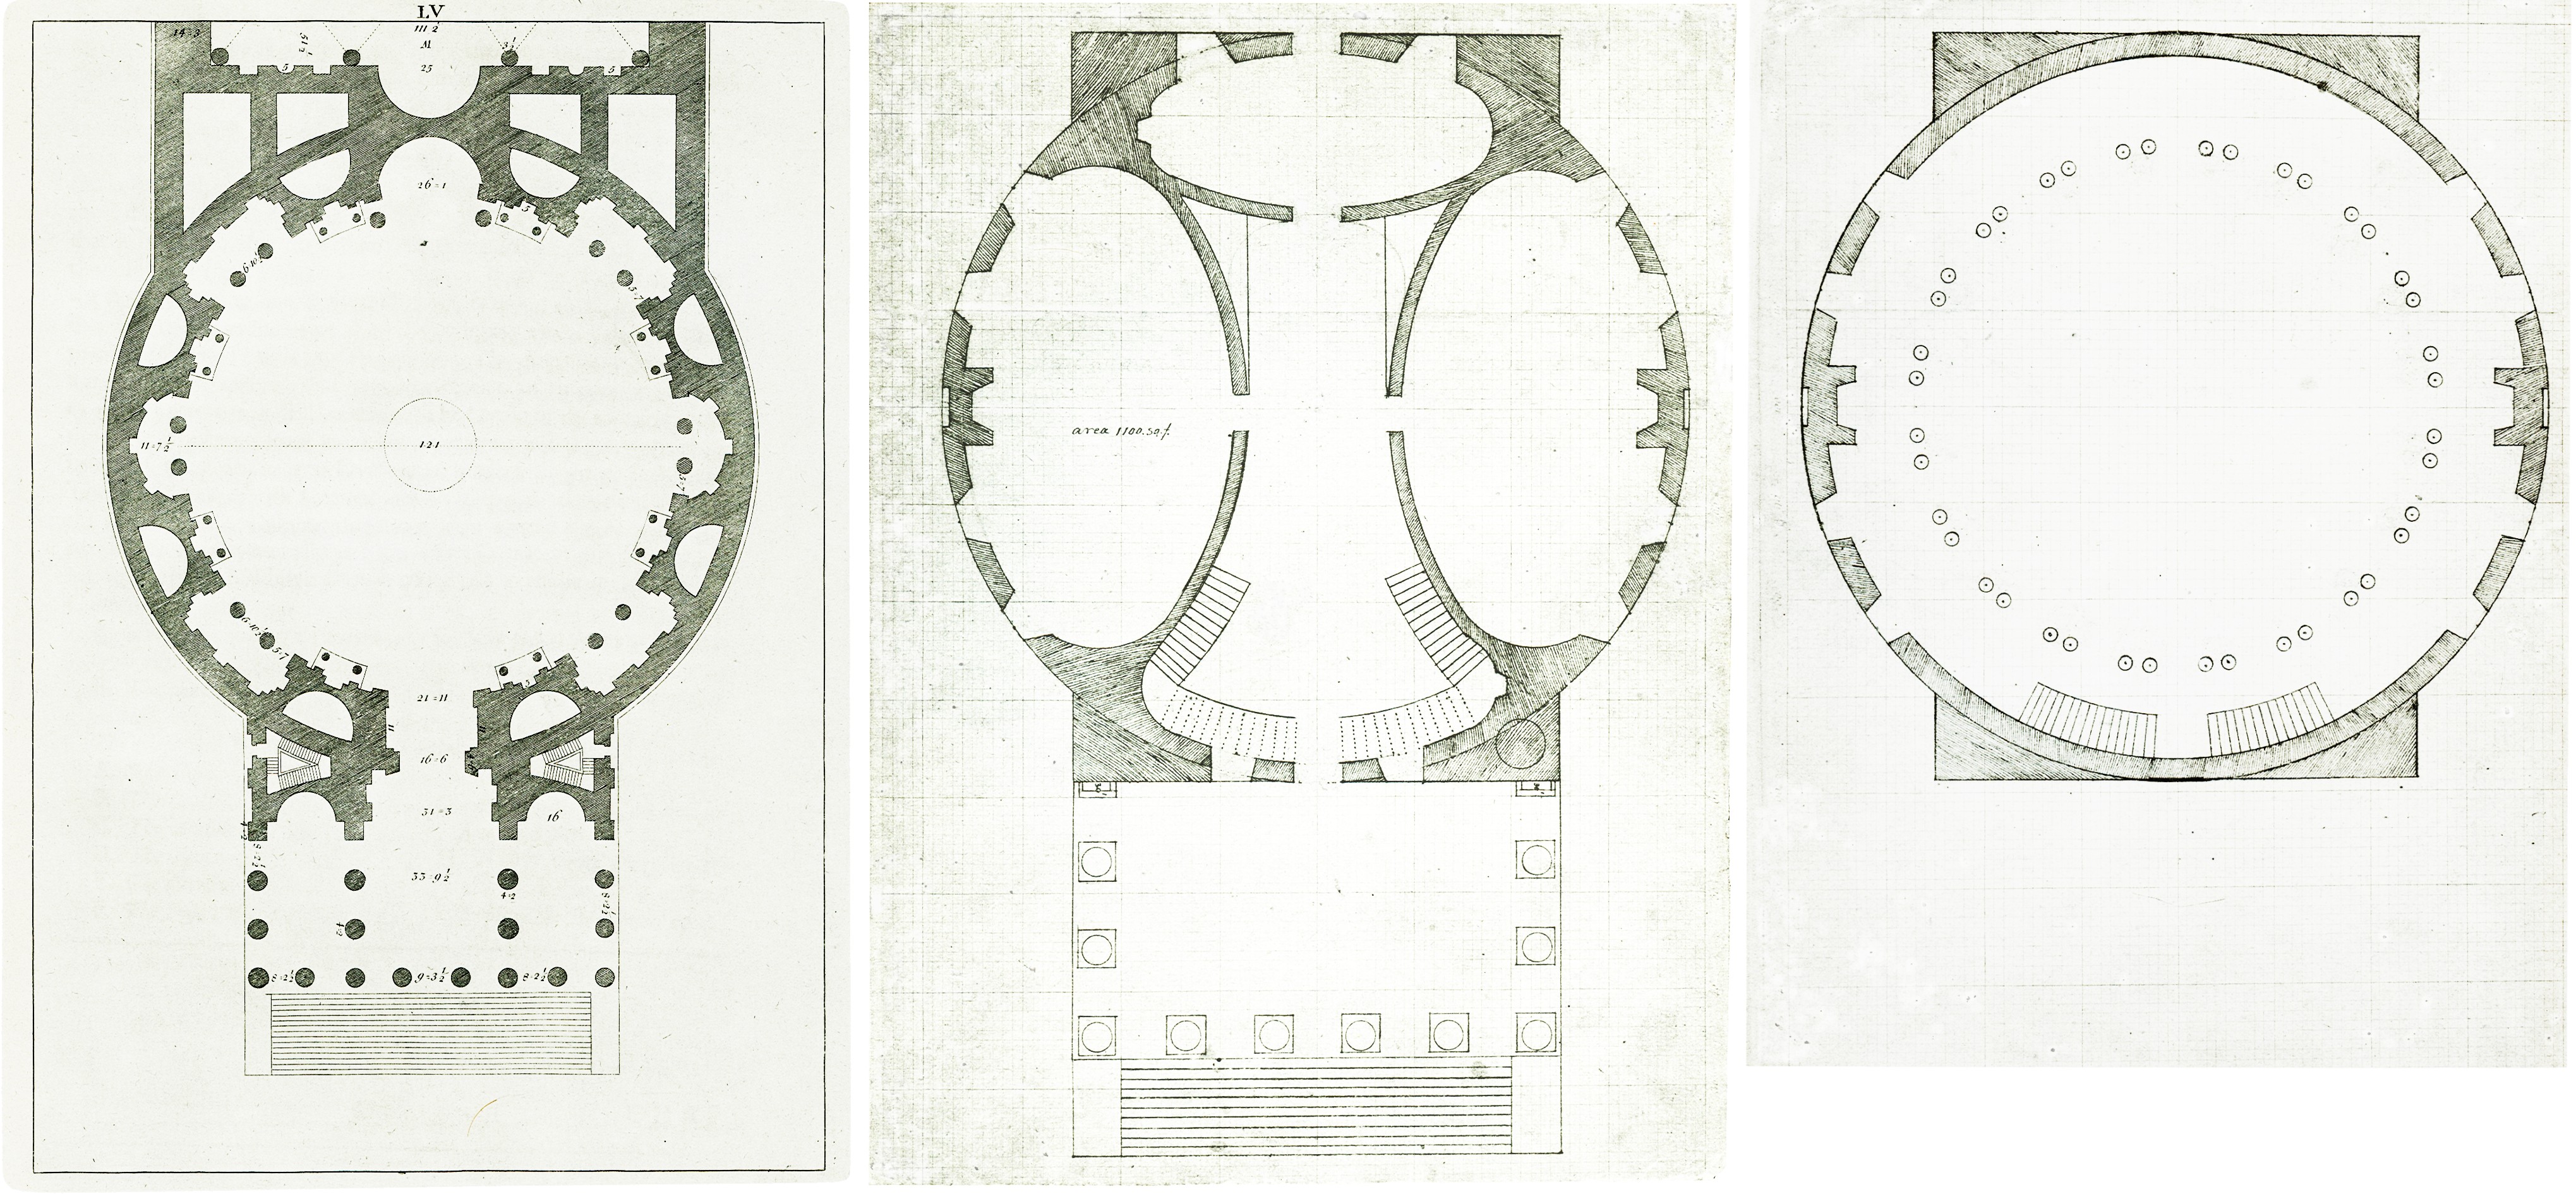 Comparison Plan of the University of Virginia Rotunda and the pantheon